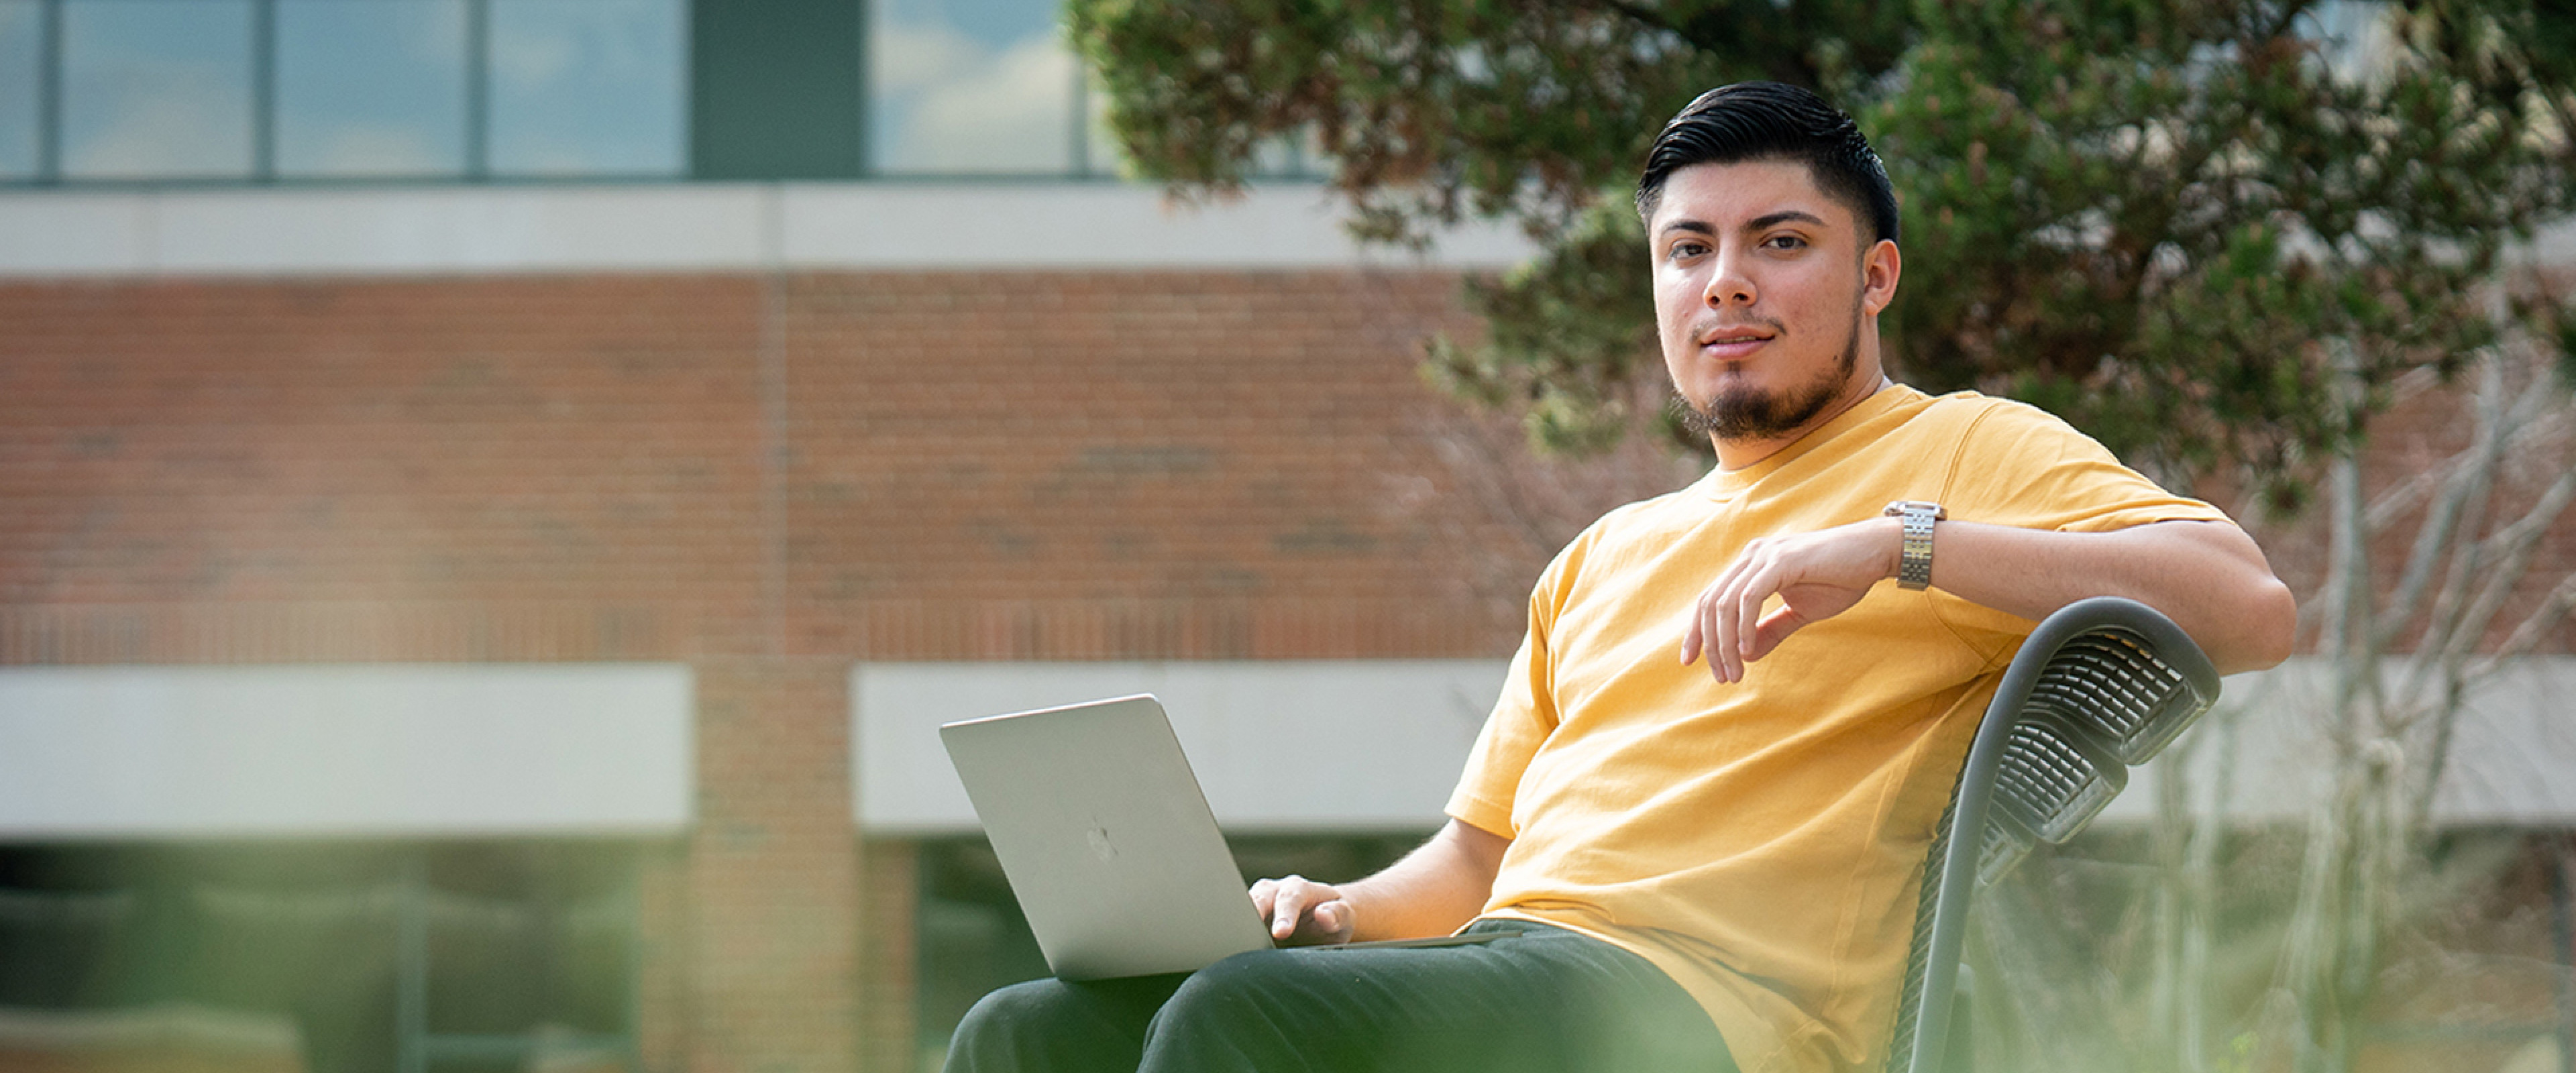 Male student on a bench with computer.